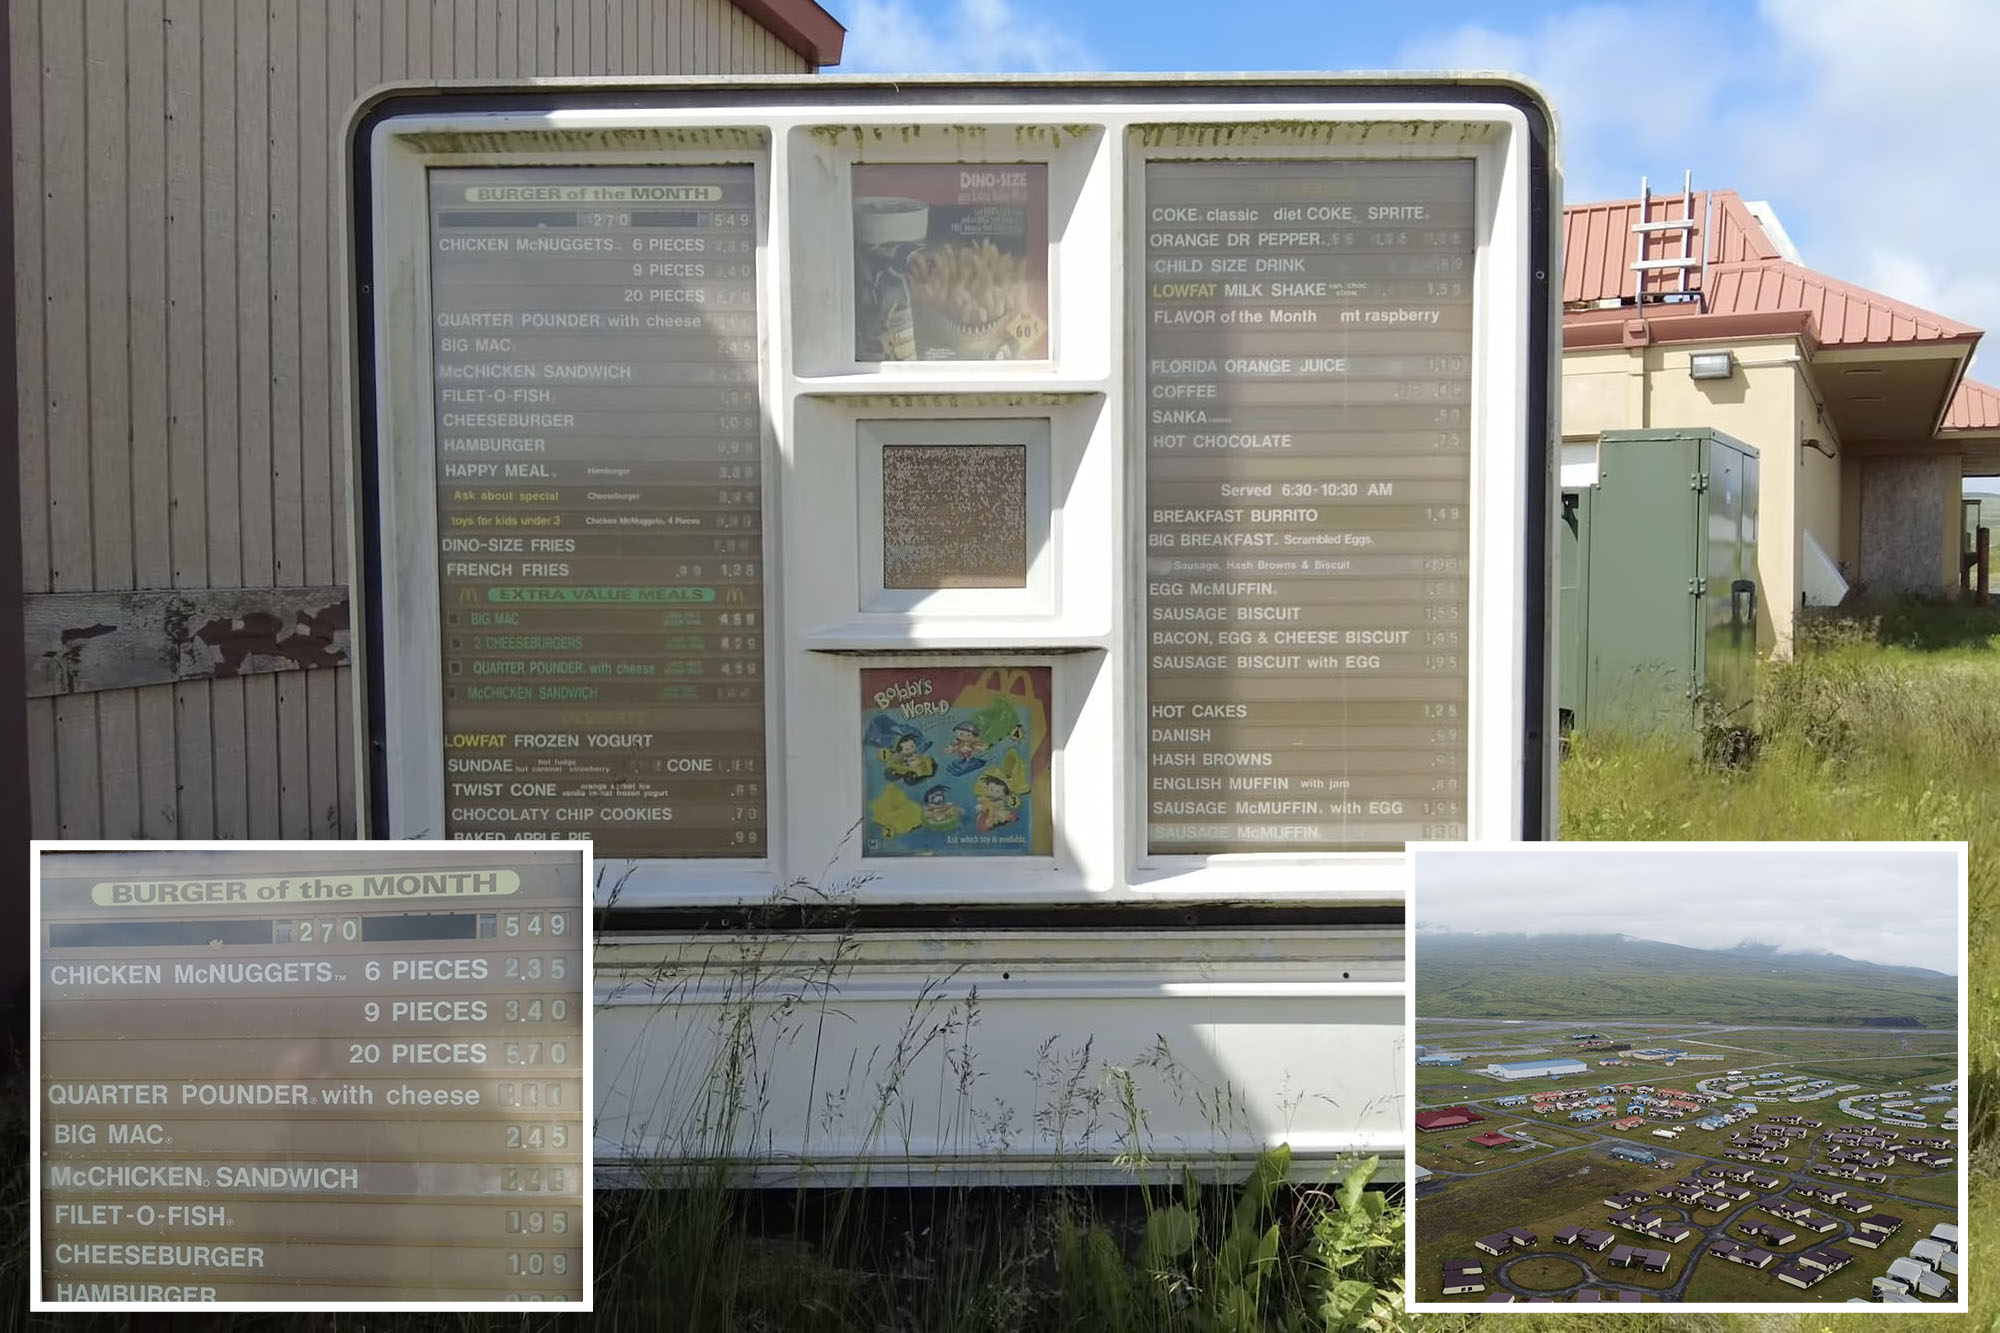 Chris Luckhardt traveled to Adak Island, Alaska, where he discovered an abandoned McDonald's — with a menu that hasn't been touched since 1994.